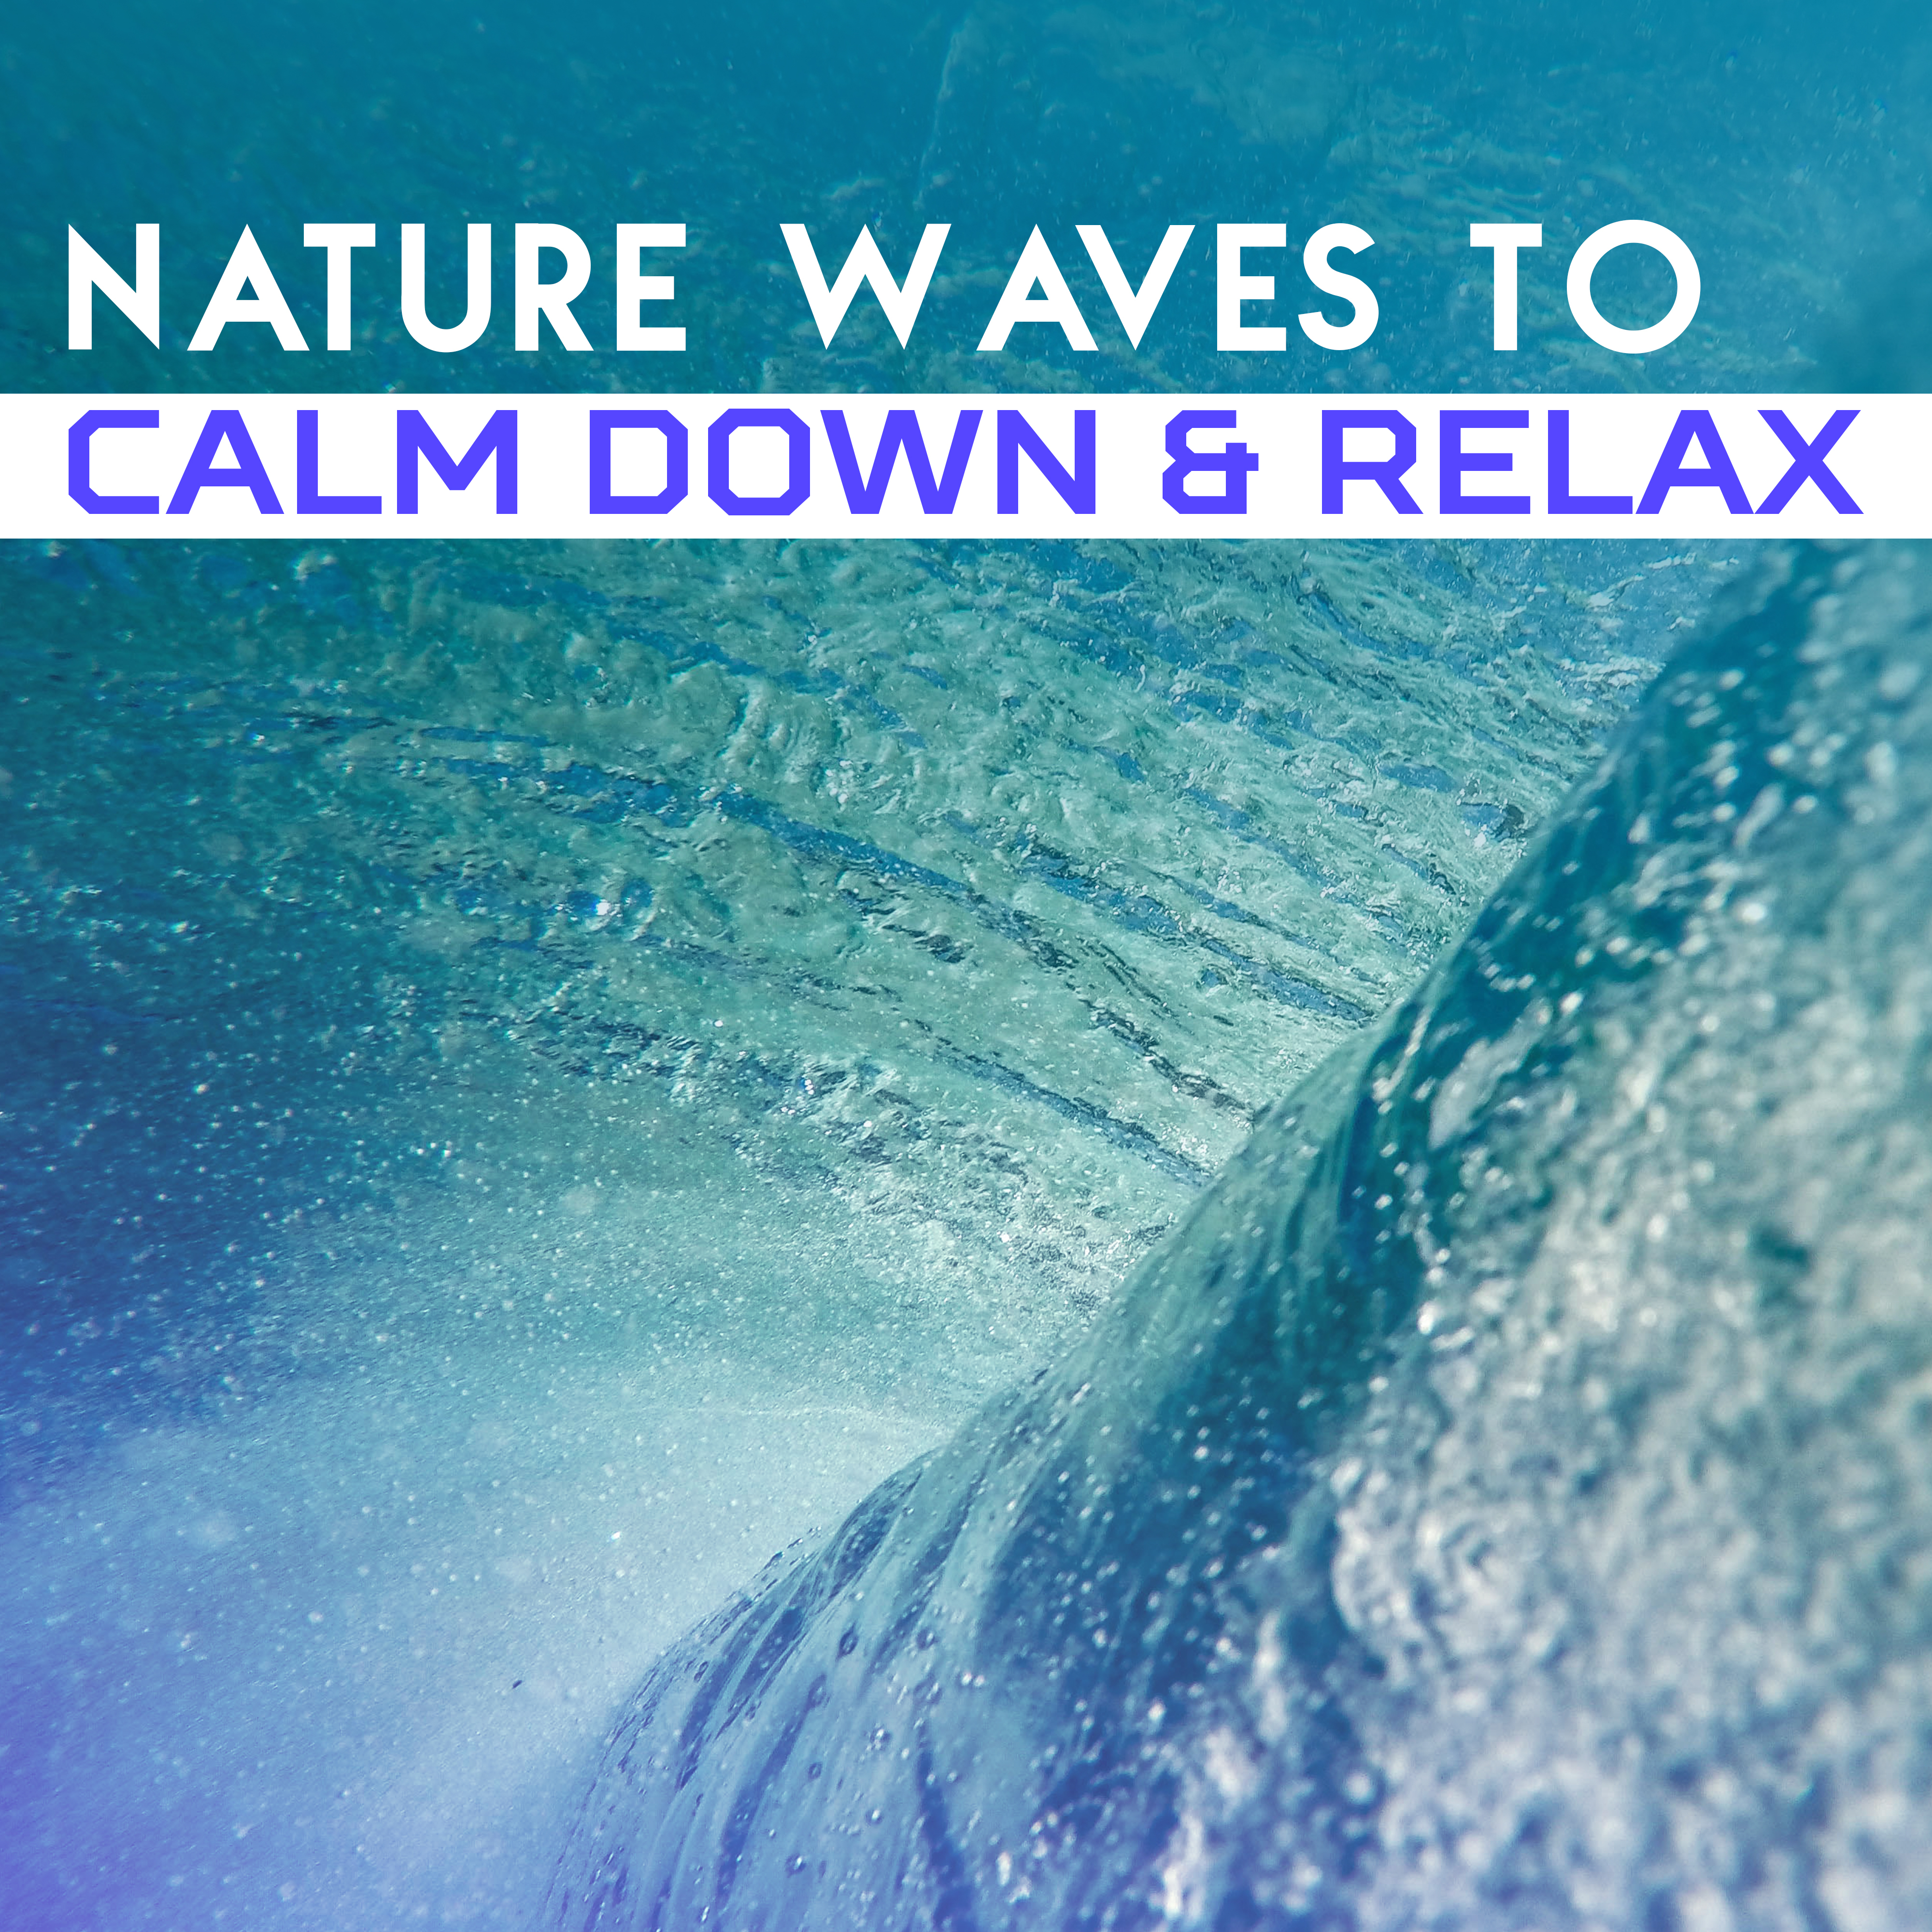 Nature Waves to Calm Down & Relax – Sounds for Mind Calmness, Peaceful New Age Songs, Easy Listening, Rest a Bit